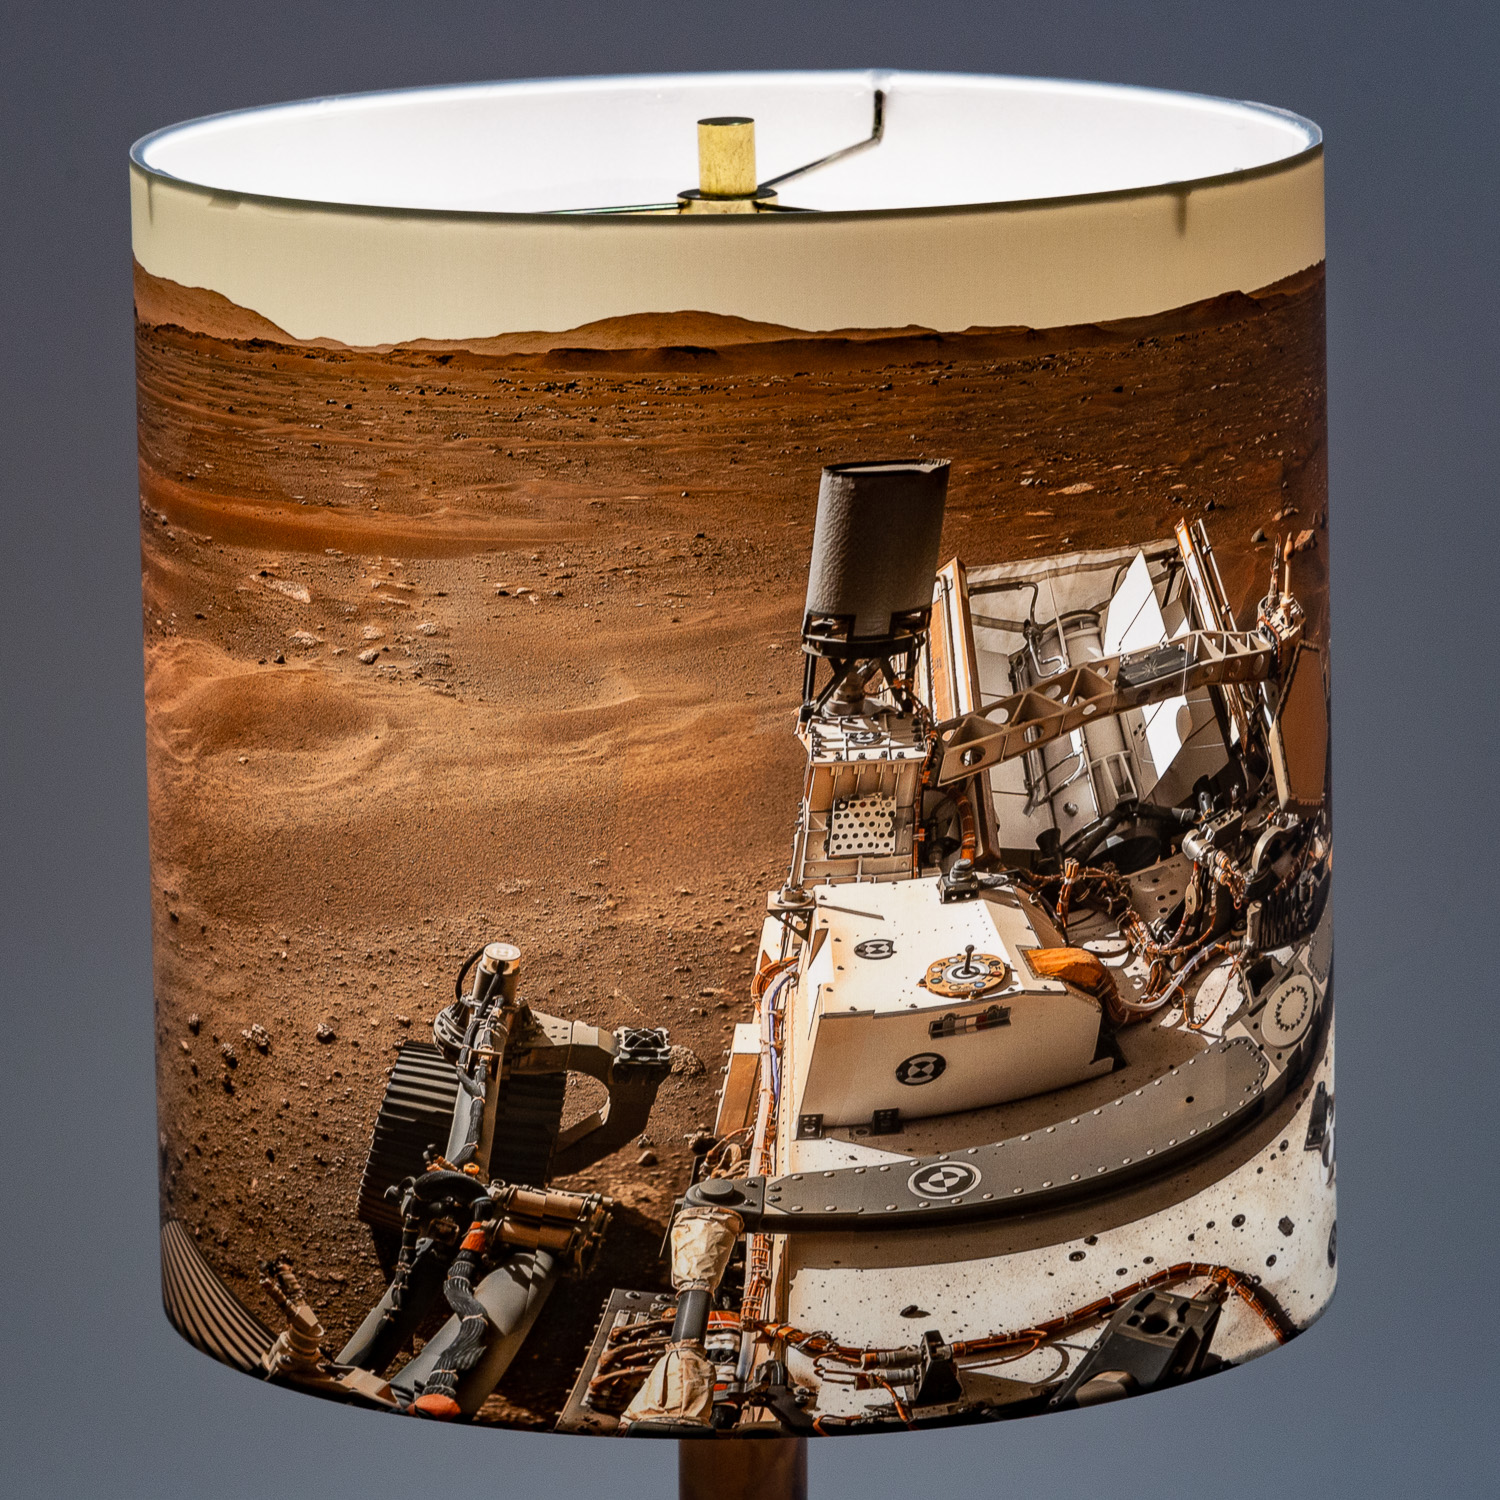 117: NASA’s Perseverance Rover Gives High-Definition Panoramic View of Landing Site